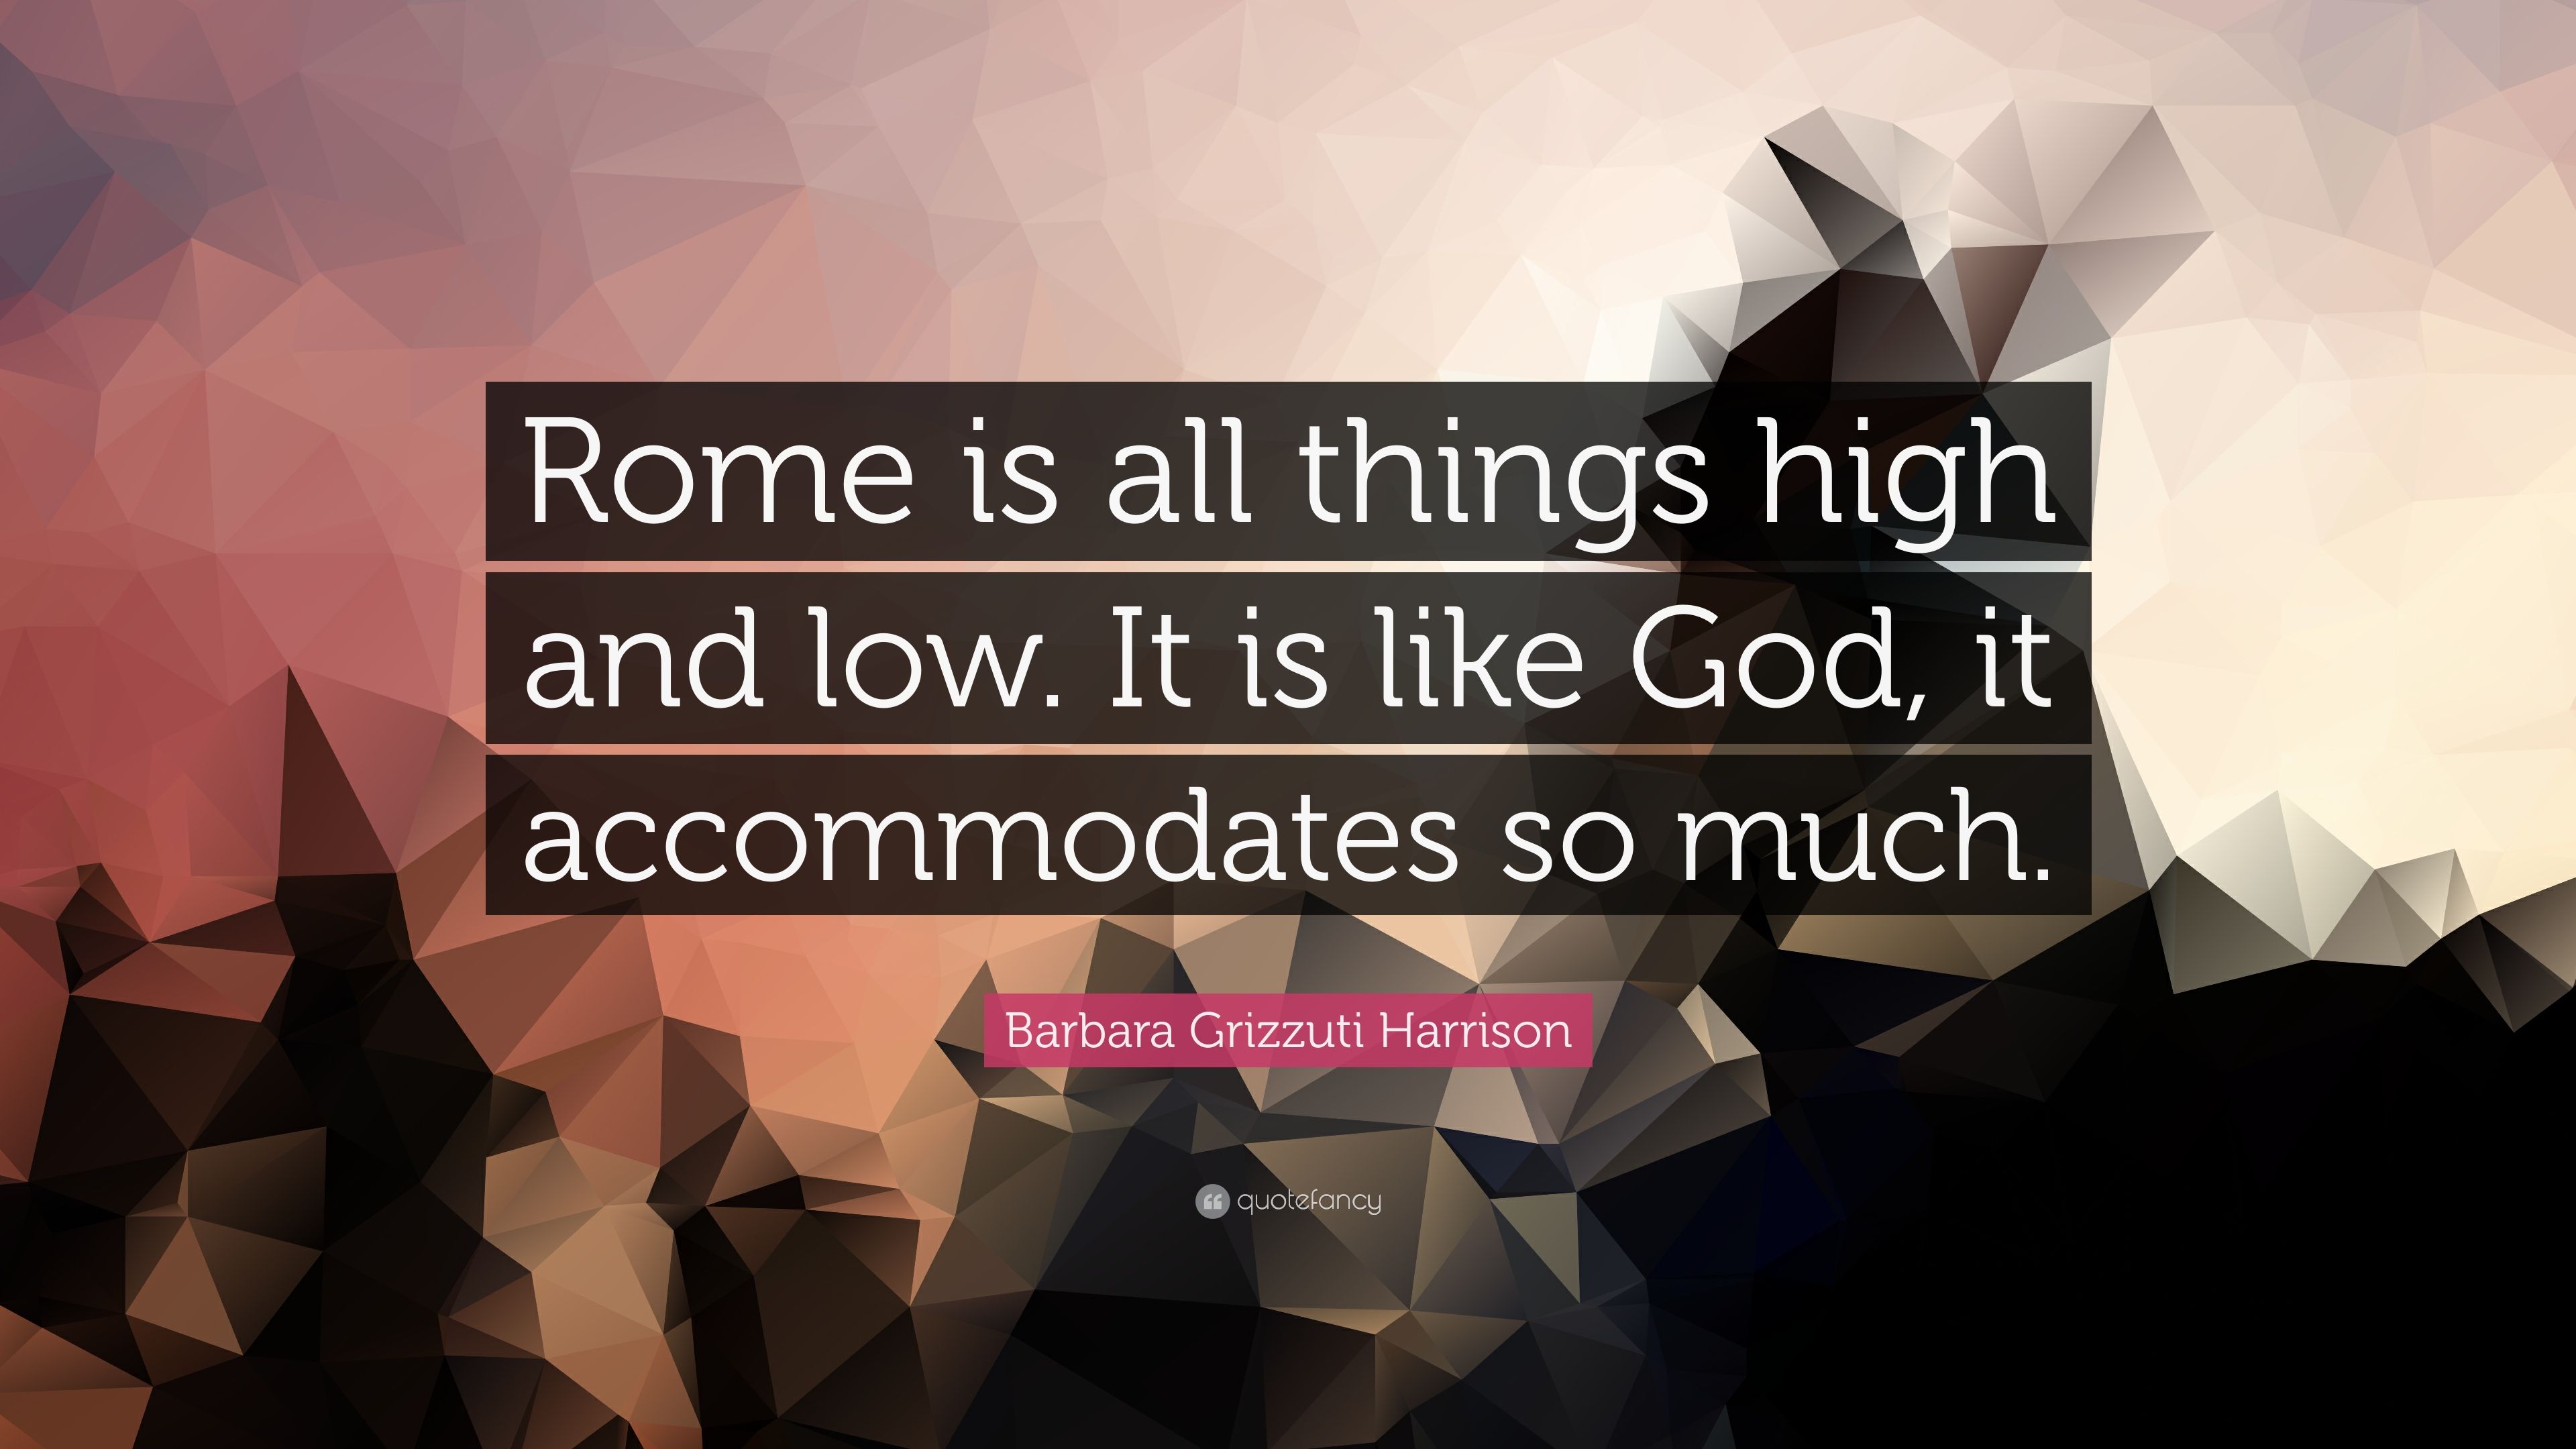 Barbara Grizzuti Harrison Quote: “Rome is all things high and low